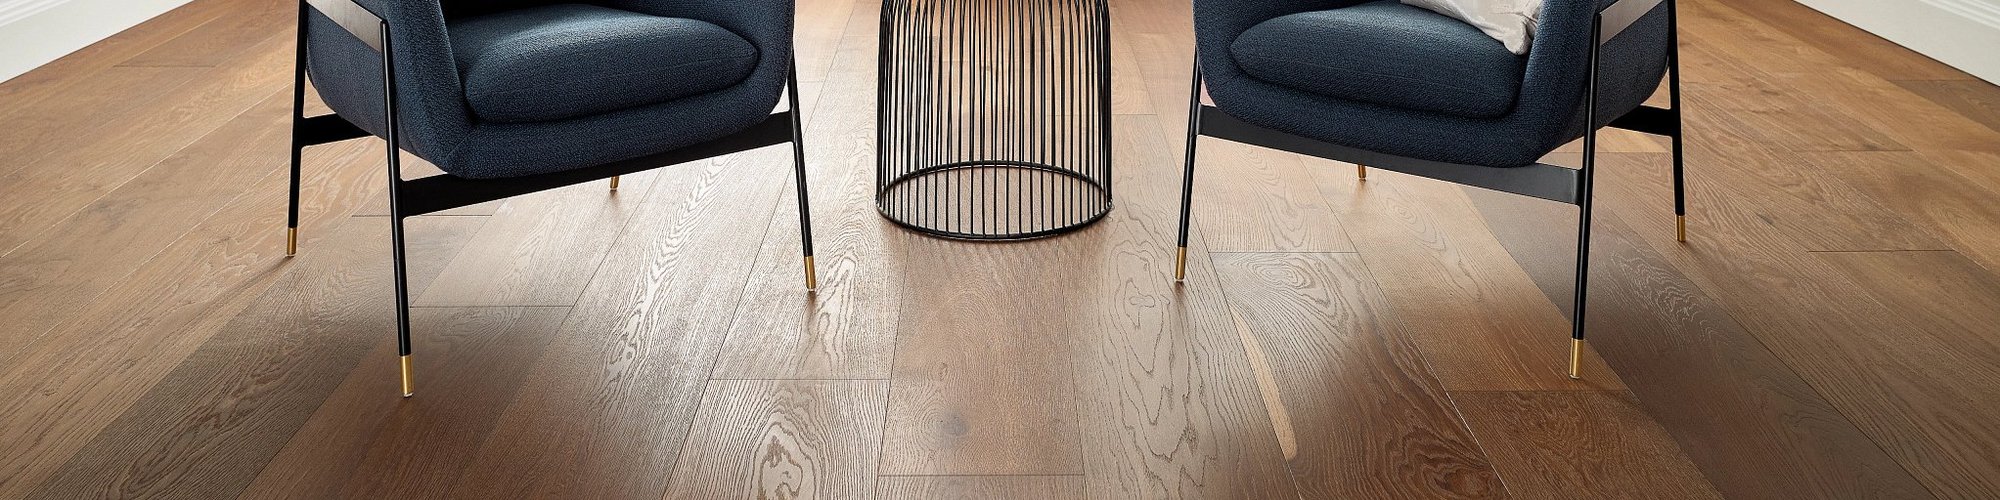 two chairs on hardwood flooring - Contract Interiors in Fort Wayne, IN